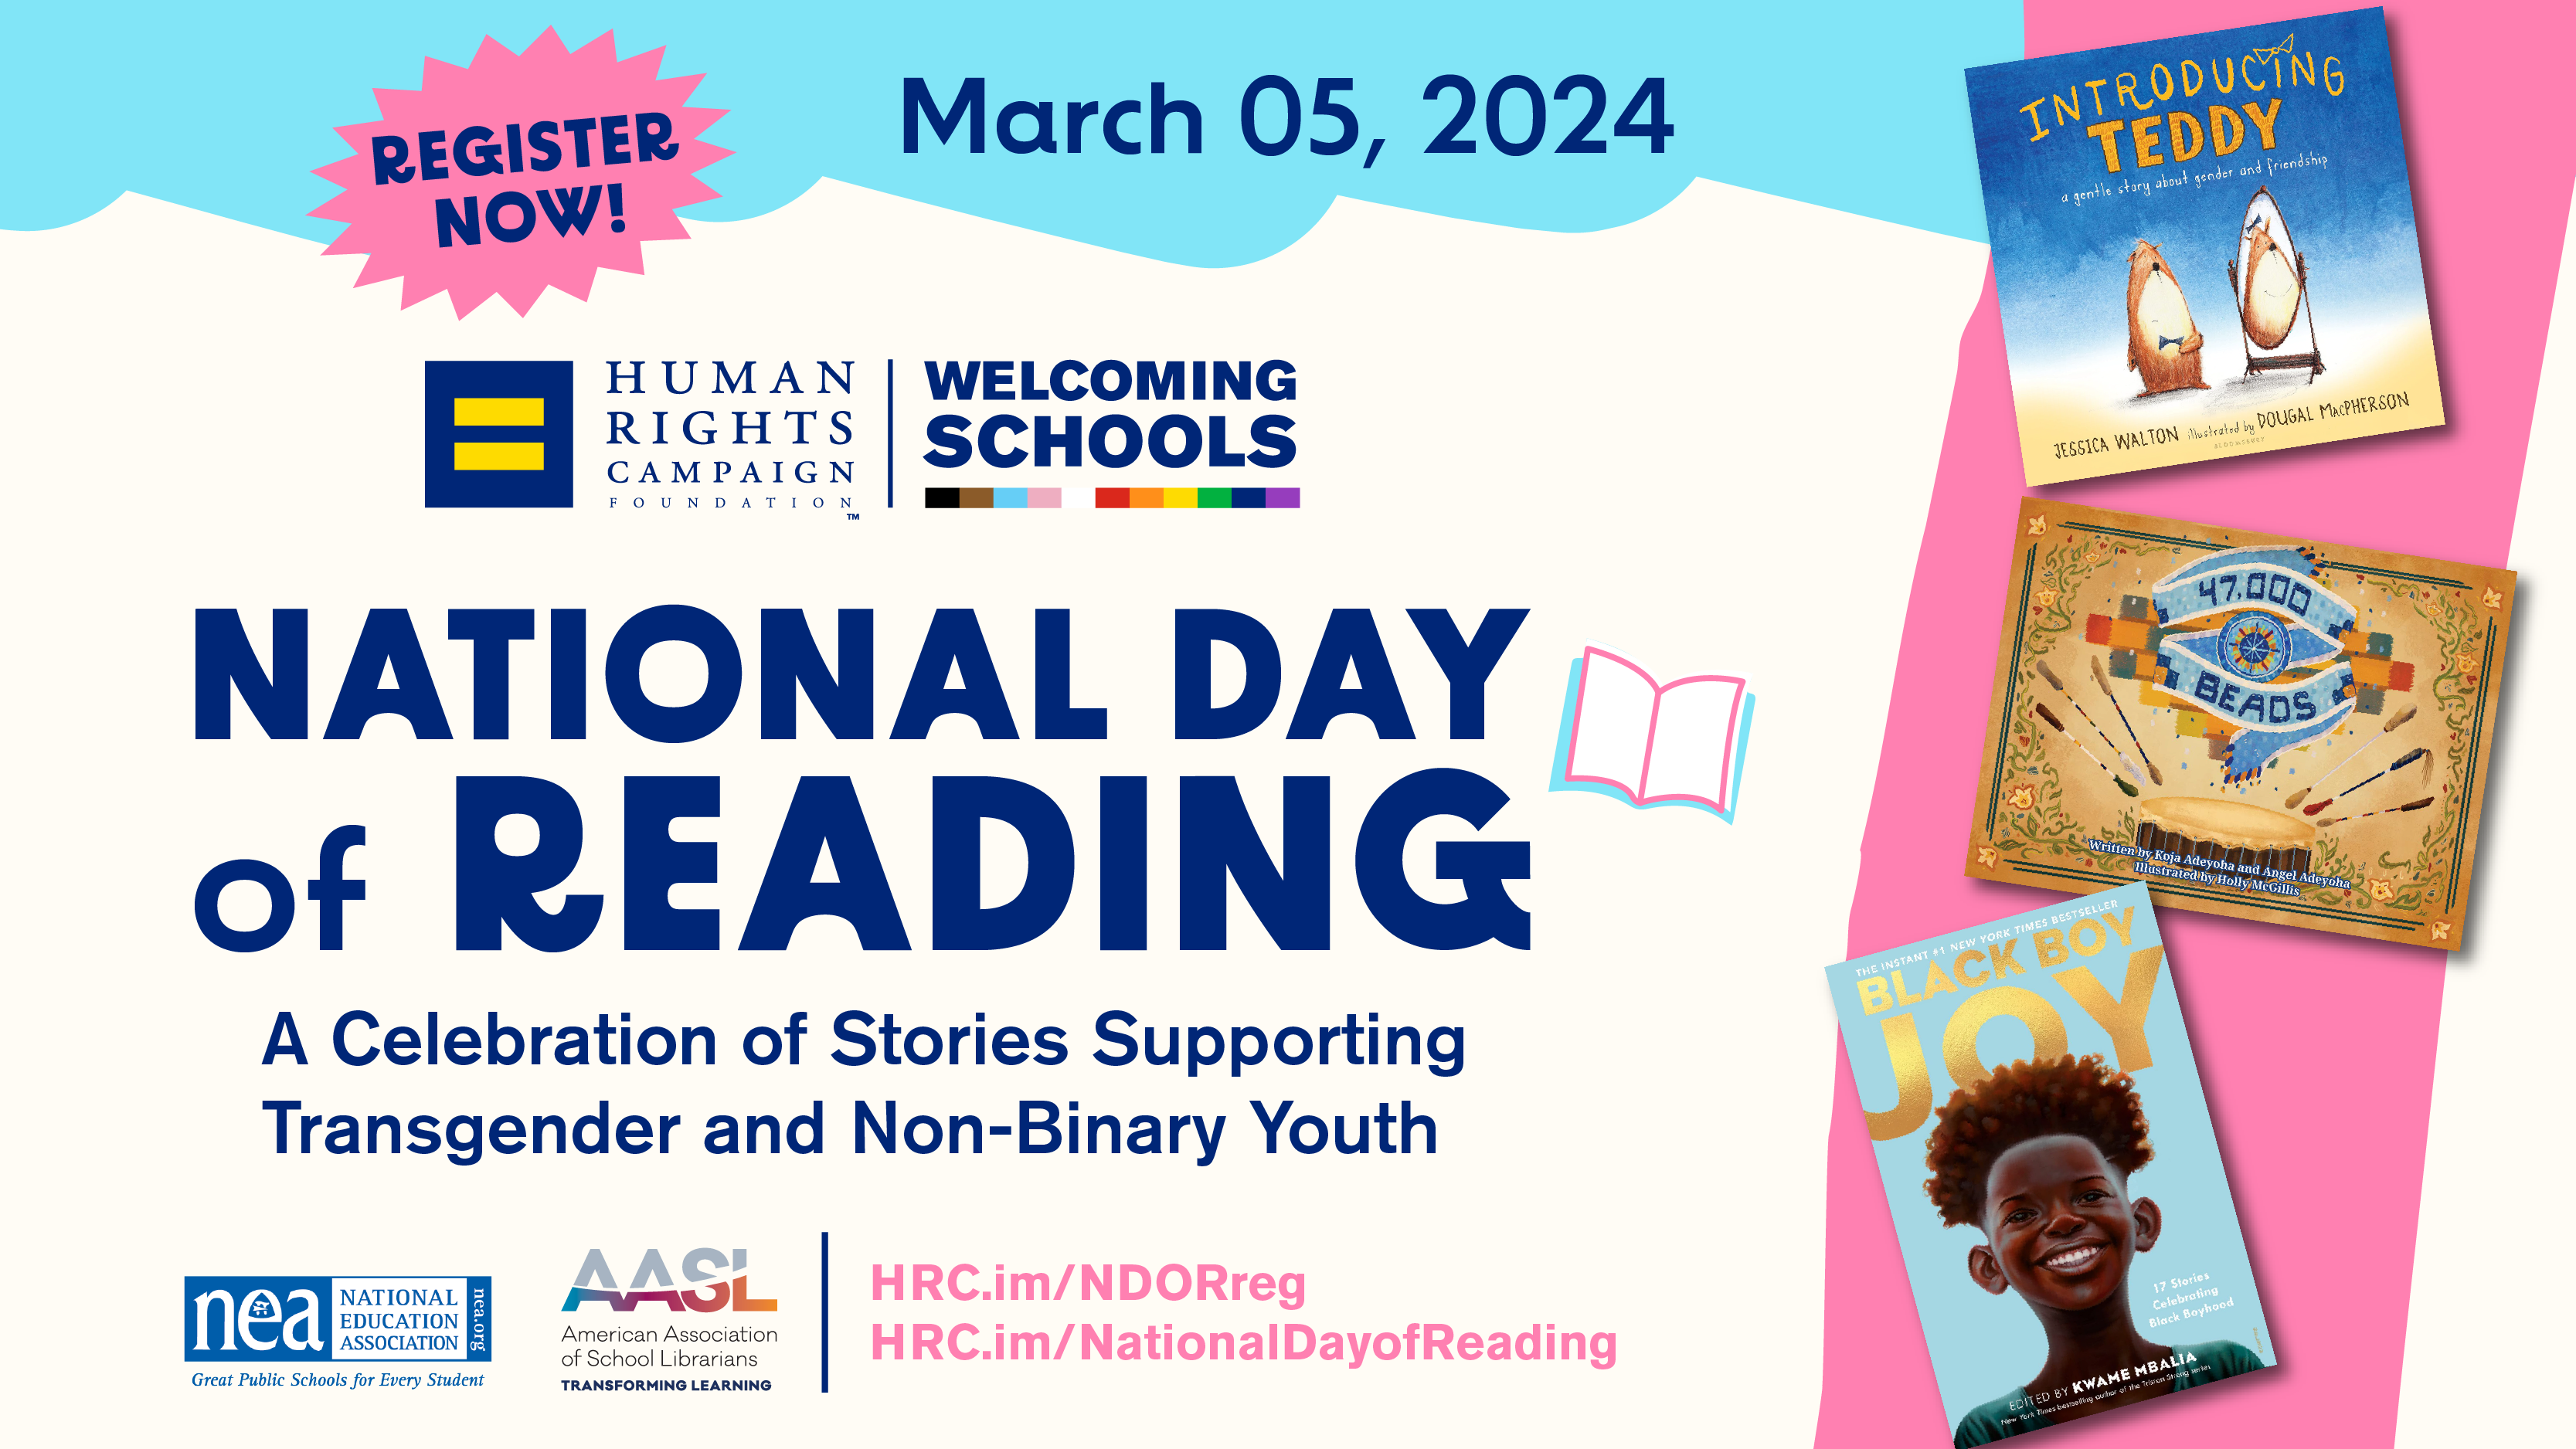 Register now! March 5, 2024. National Day of Reading: A Celebration of Stories Supporting Transgender and Non-Binary Youth. Human Rights Campaign, welcoming Schools. \National Education Association. American Association of School Librarians. hrc.im/NDORreg hrc.im/NationalDayofReading